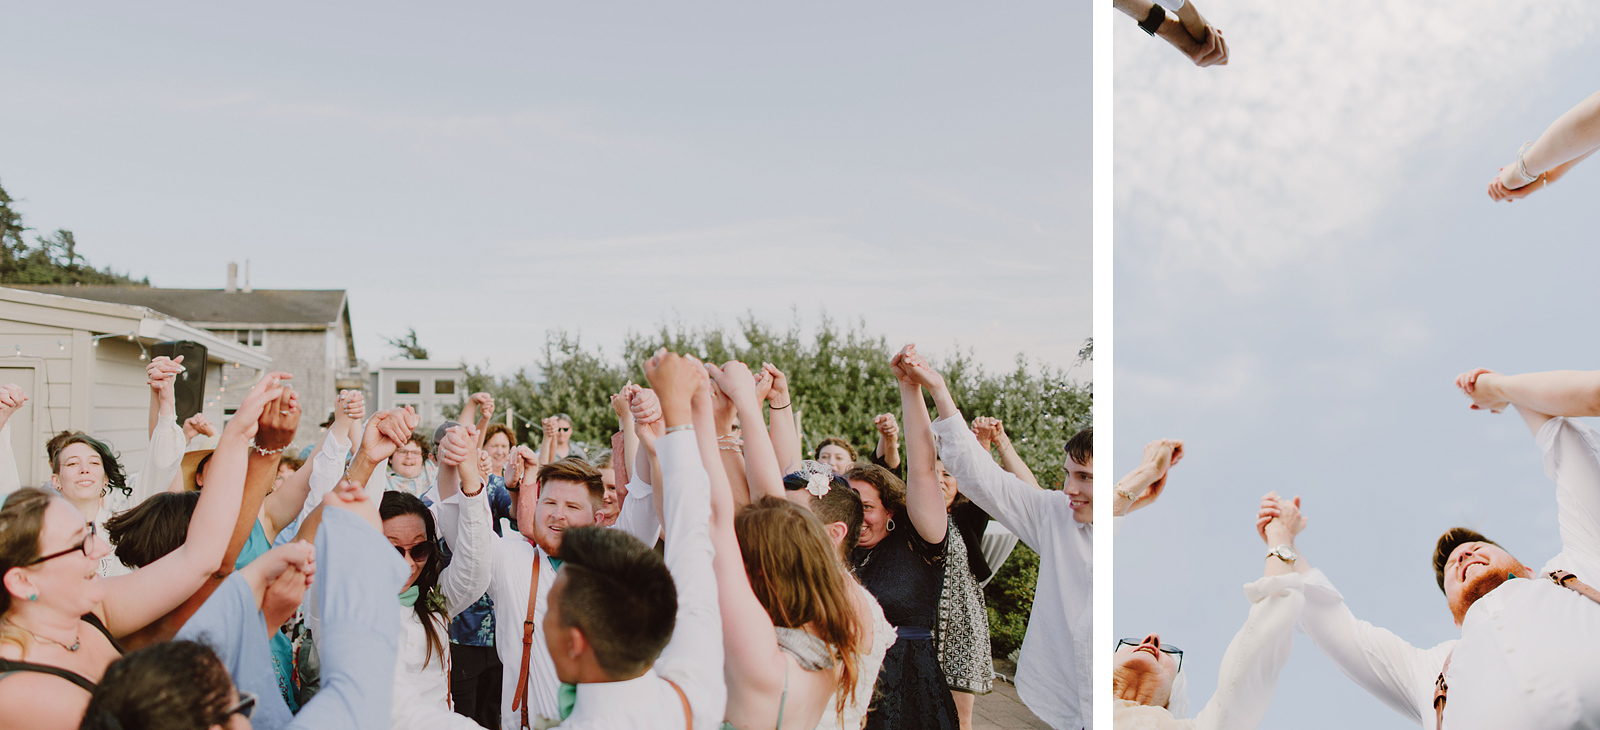 Guests coming together to raise their hands in celebration while dancing during the hora - Oceanside Community Club Wedding on the Oregon Coast” title=